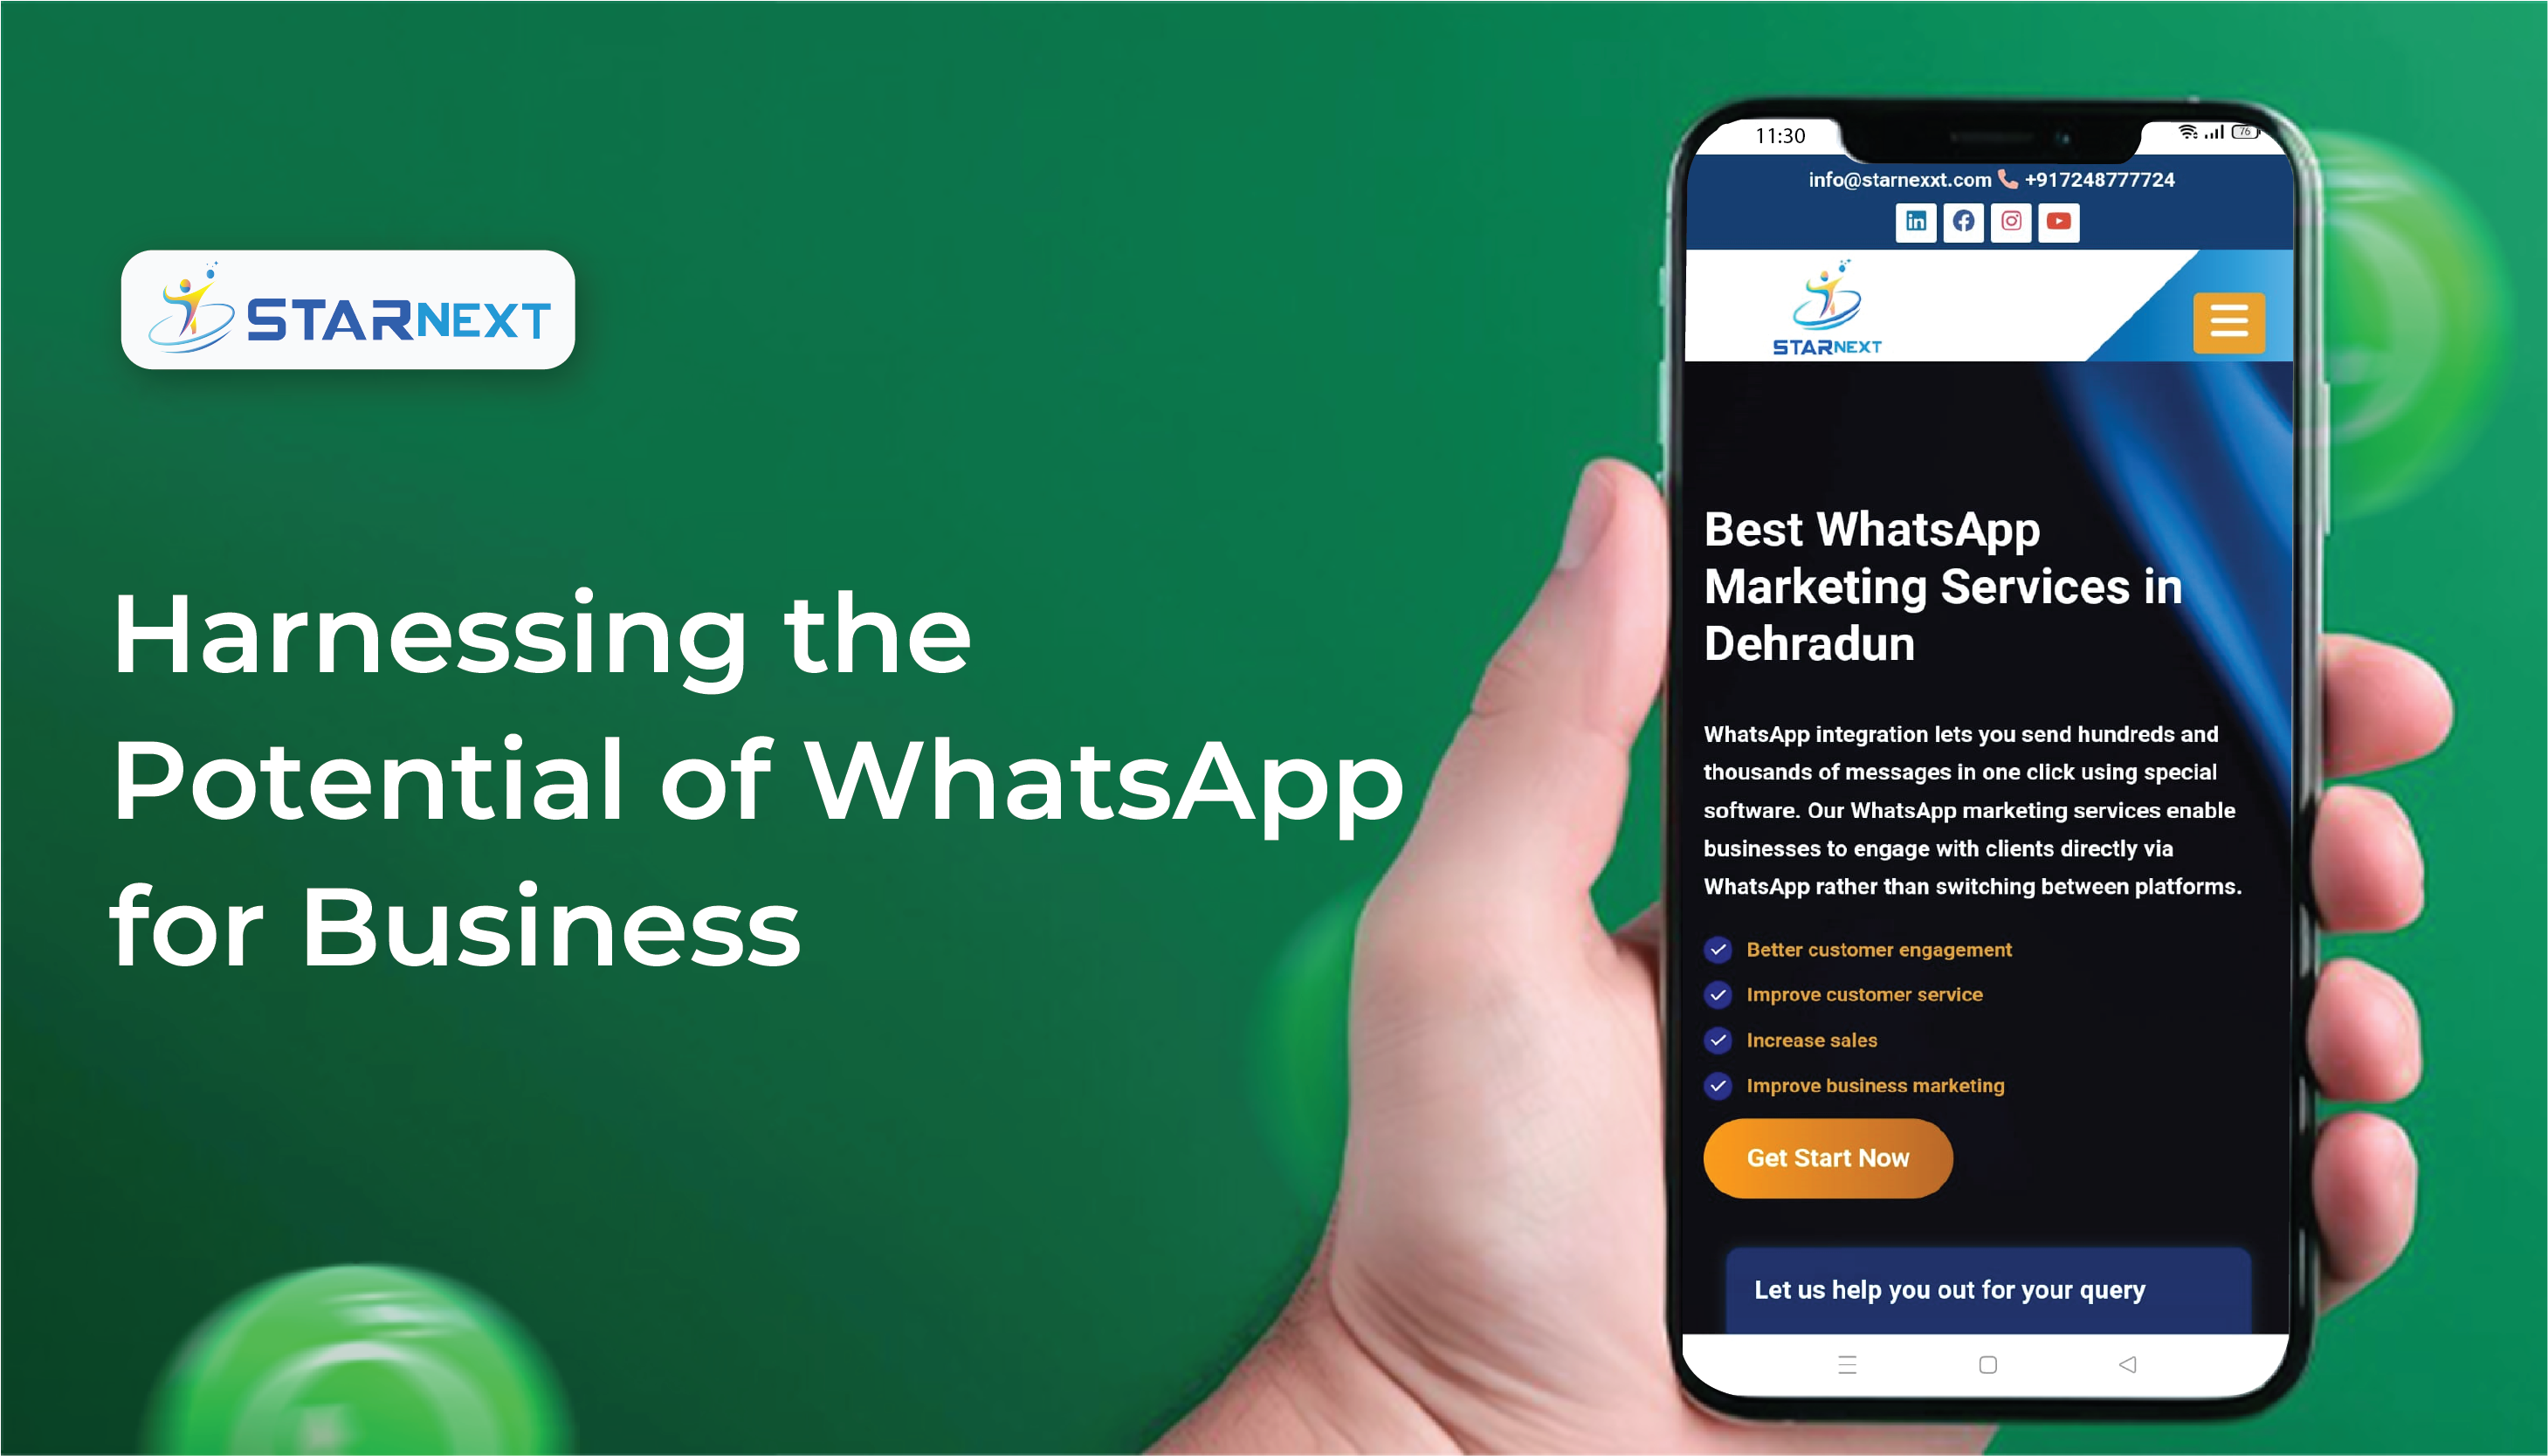 Benefits of WhatsApp for Business